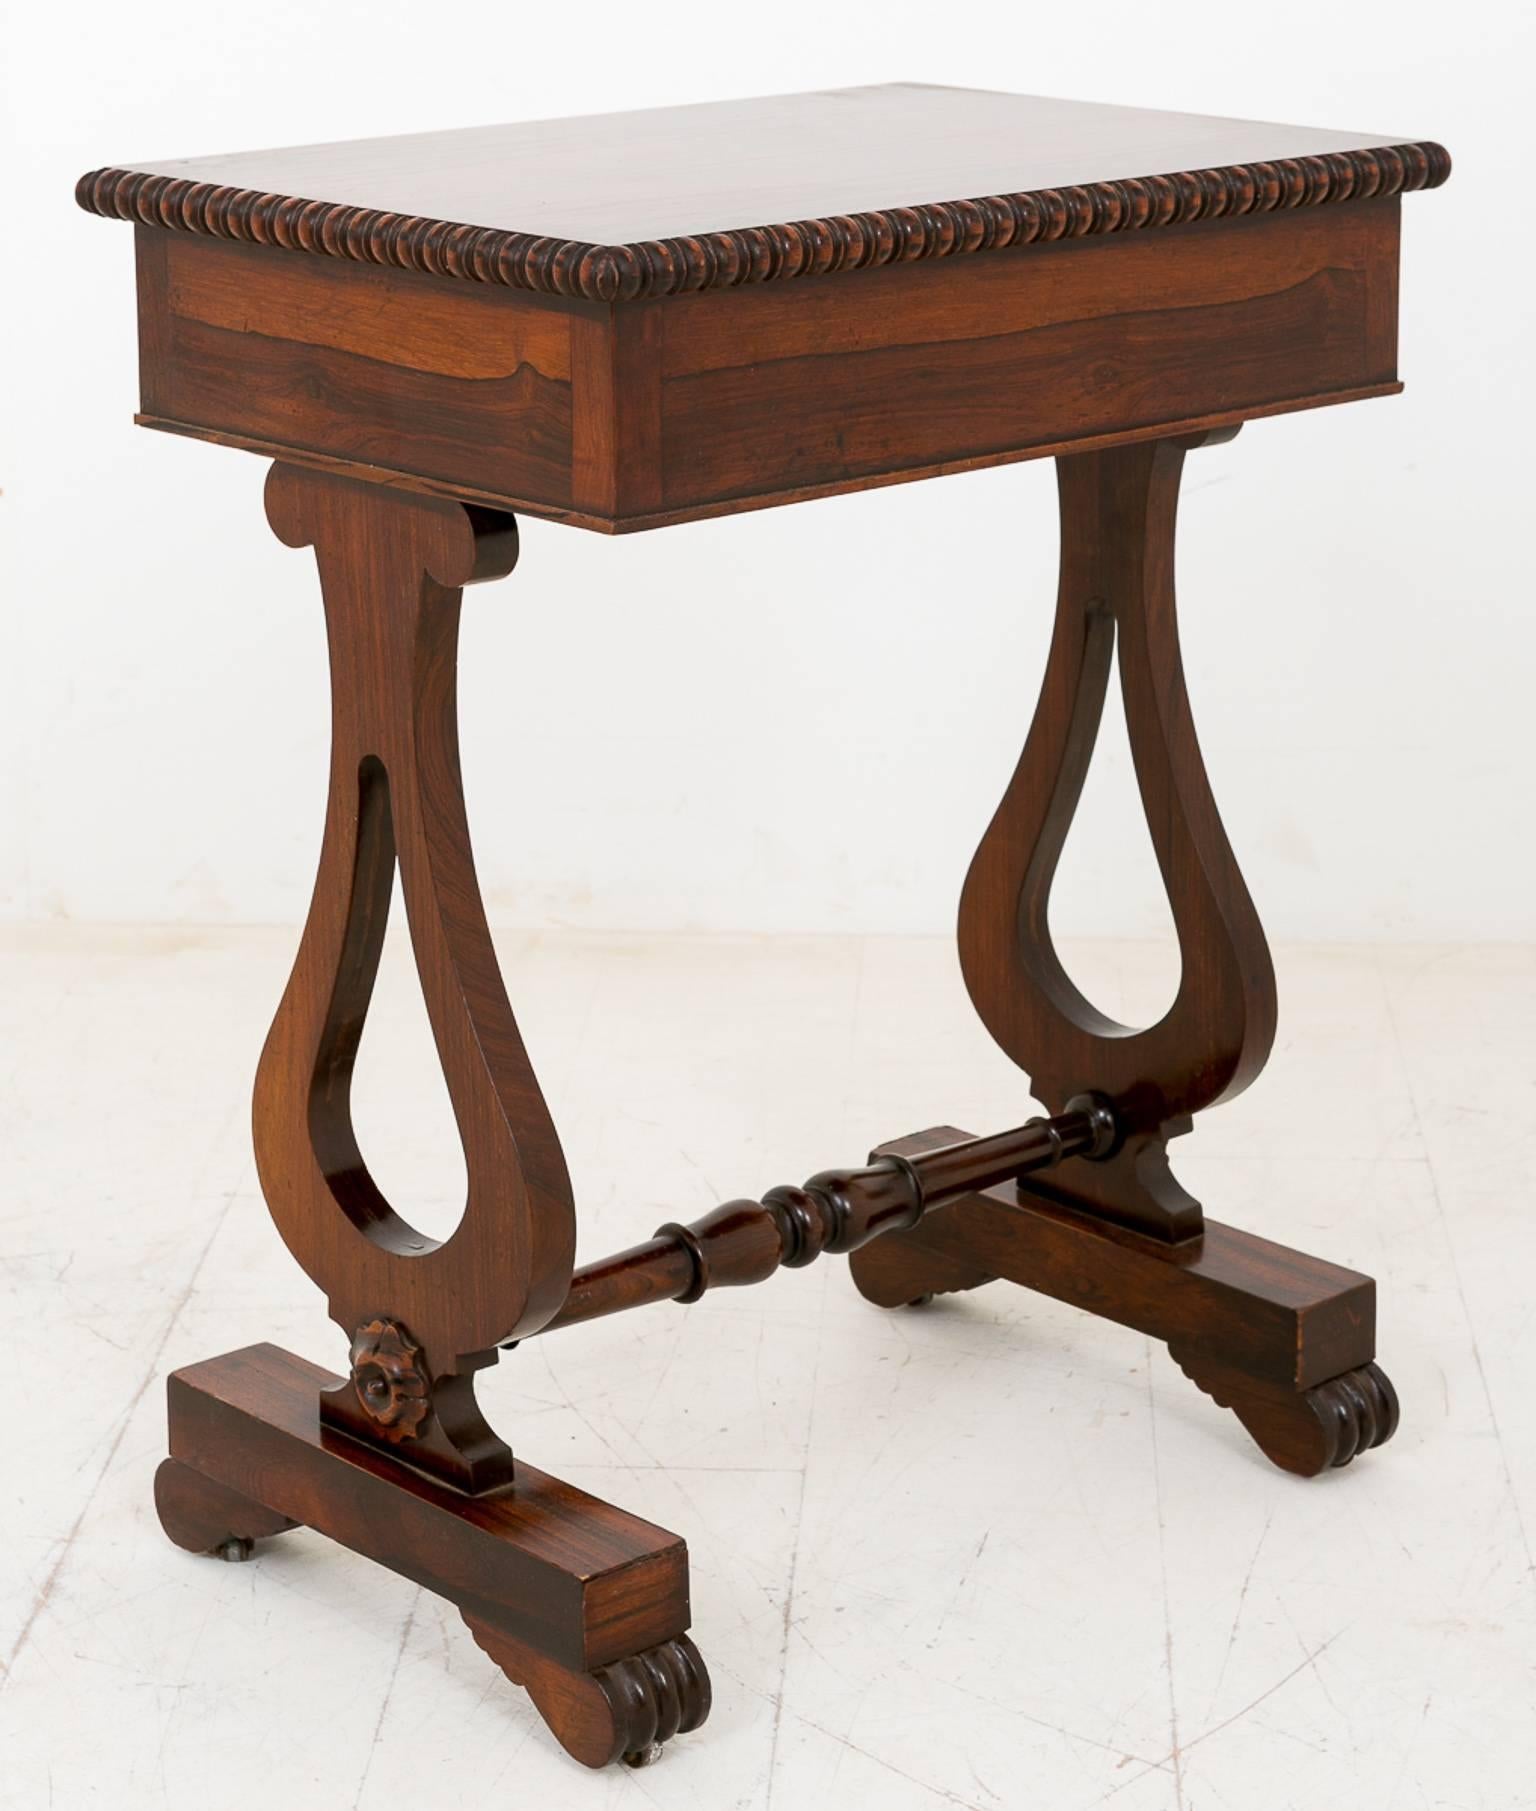 William IV Rio rosewood side table. Standing on turned feet, Lyre end supports with carved patrea together with a turned stretcher.
The mahogany lined drawer with original brass lock and knobs.
The highly figured top having a half turned